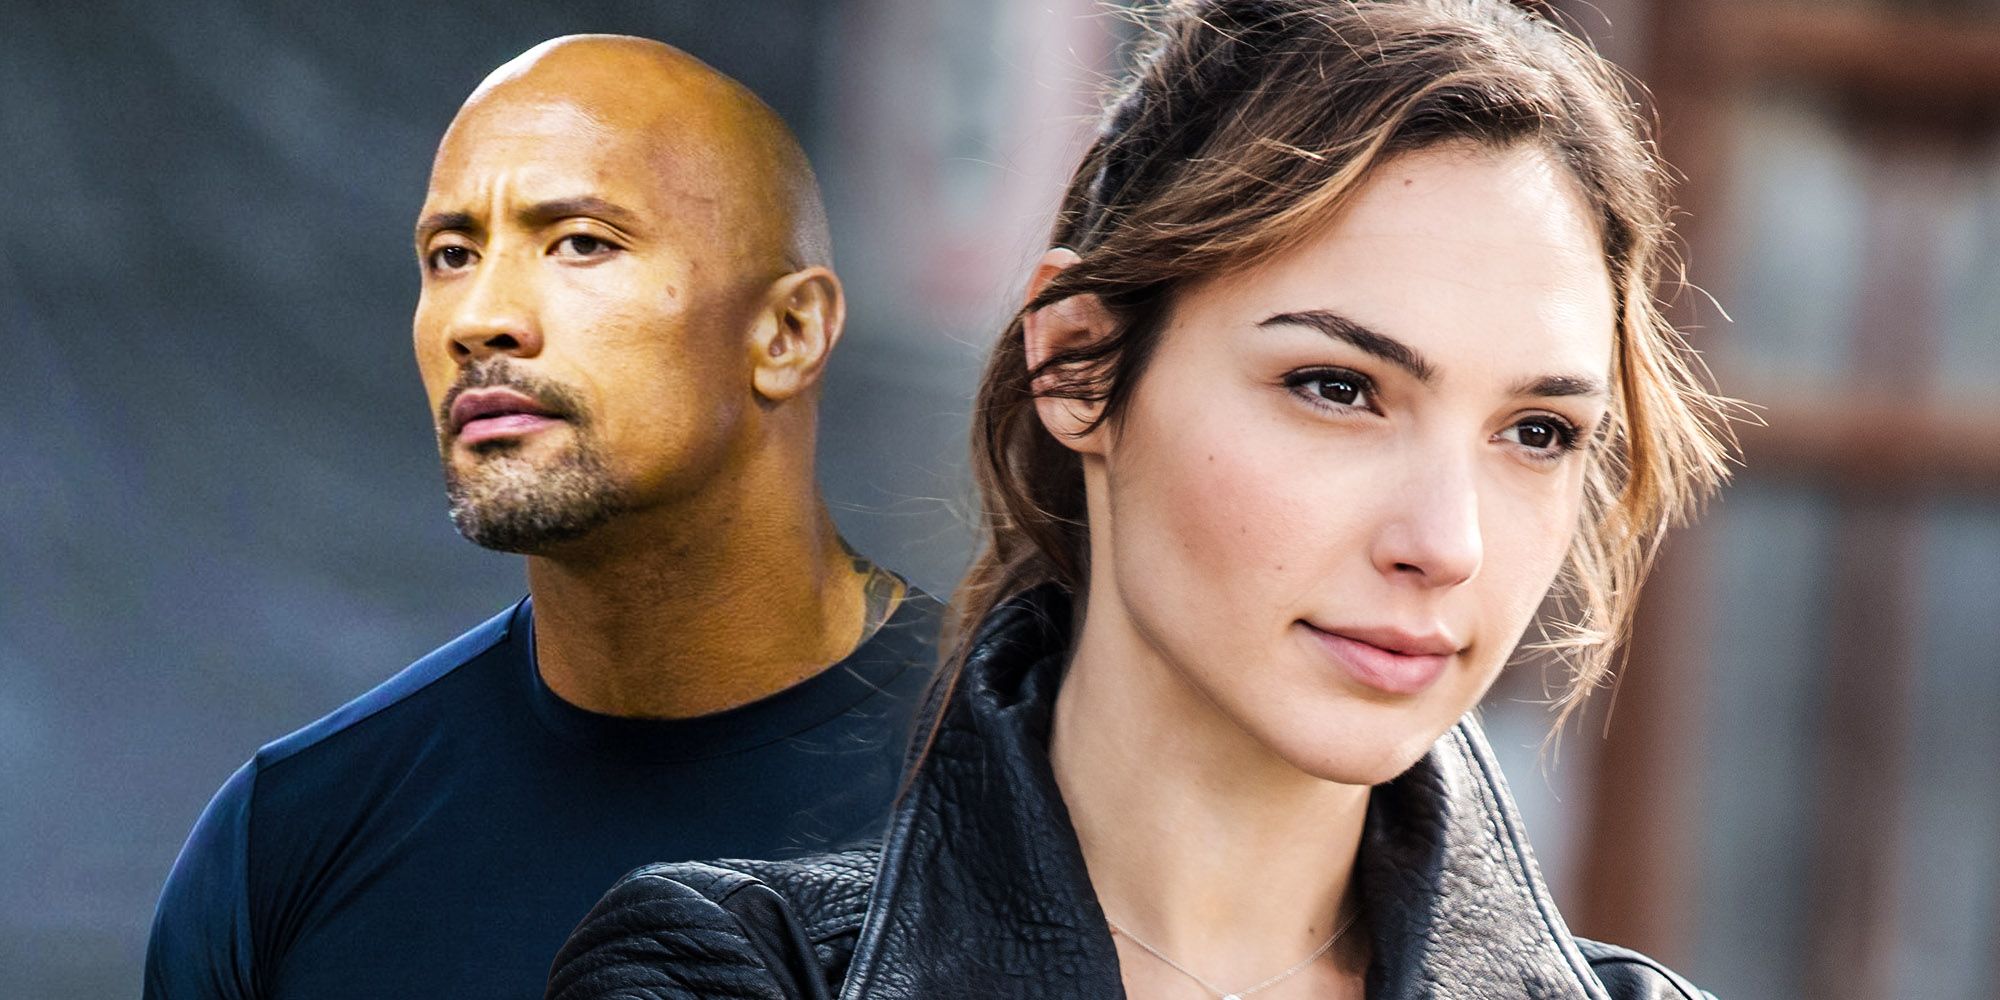 10 Fast And Furious 11 Theories That Would Beat The Rock And Gal Gadots Fast X Returns 7185